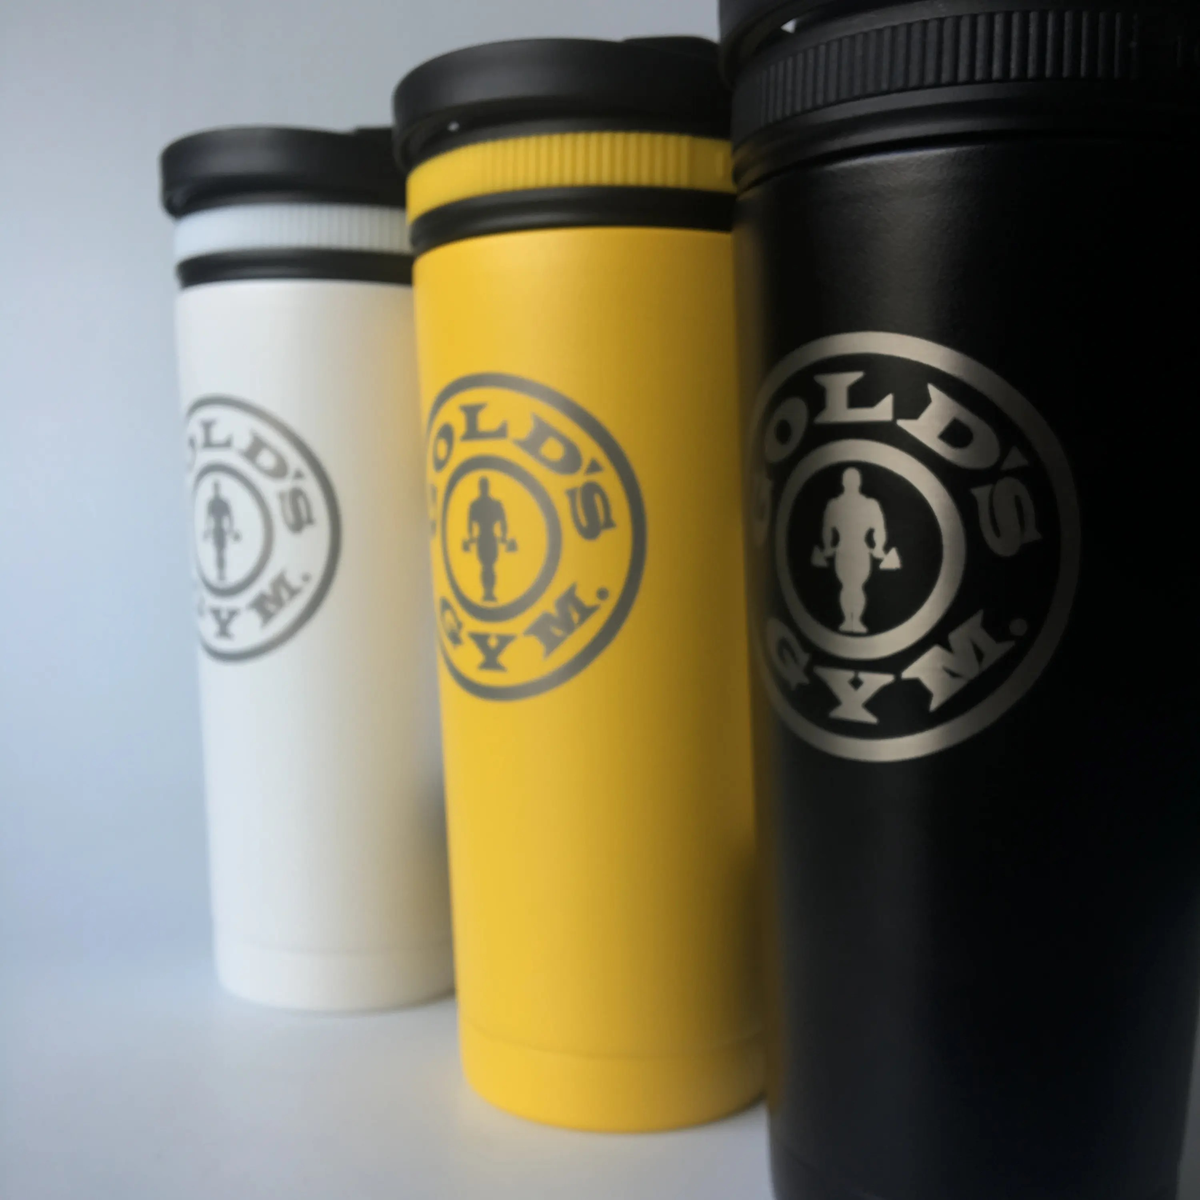 An image of 26oz Ice Shakers with the Gold's Gym logo engraved on them.